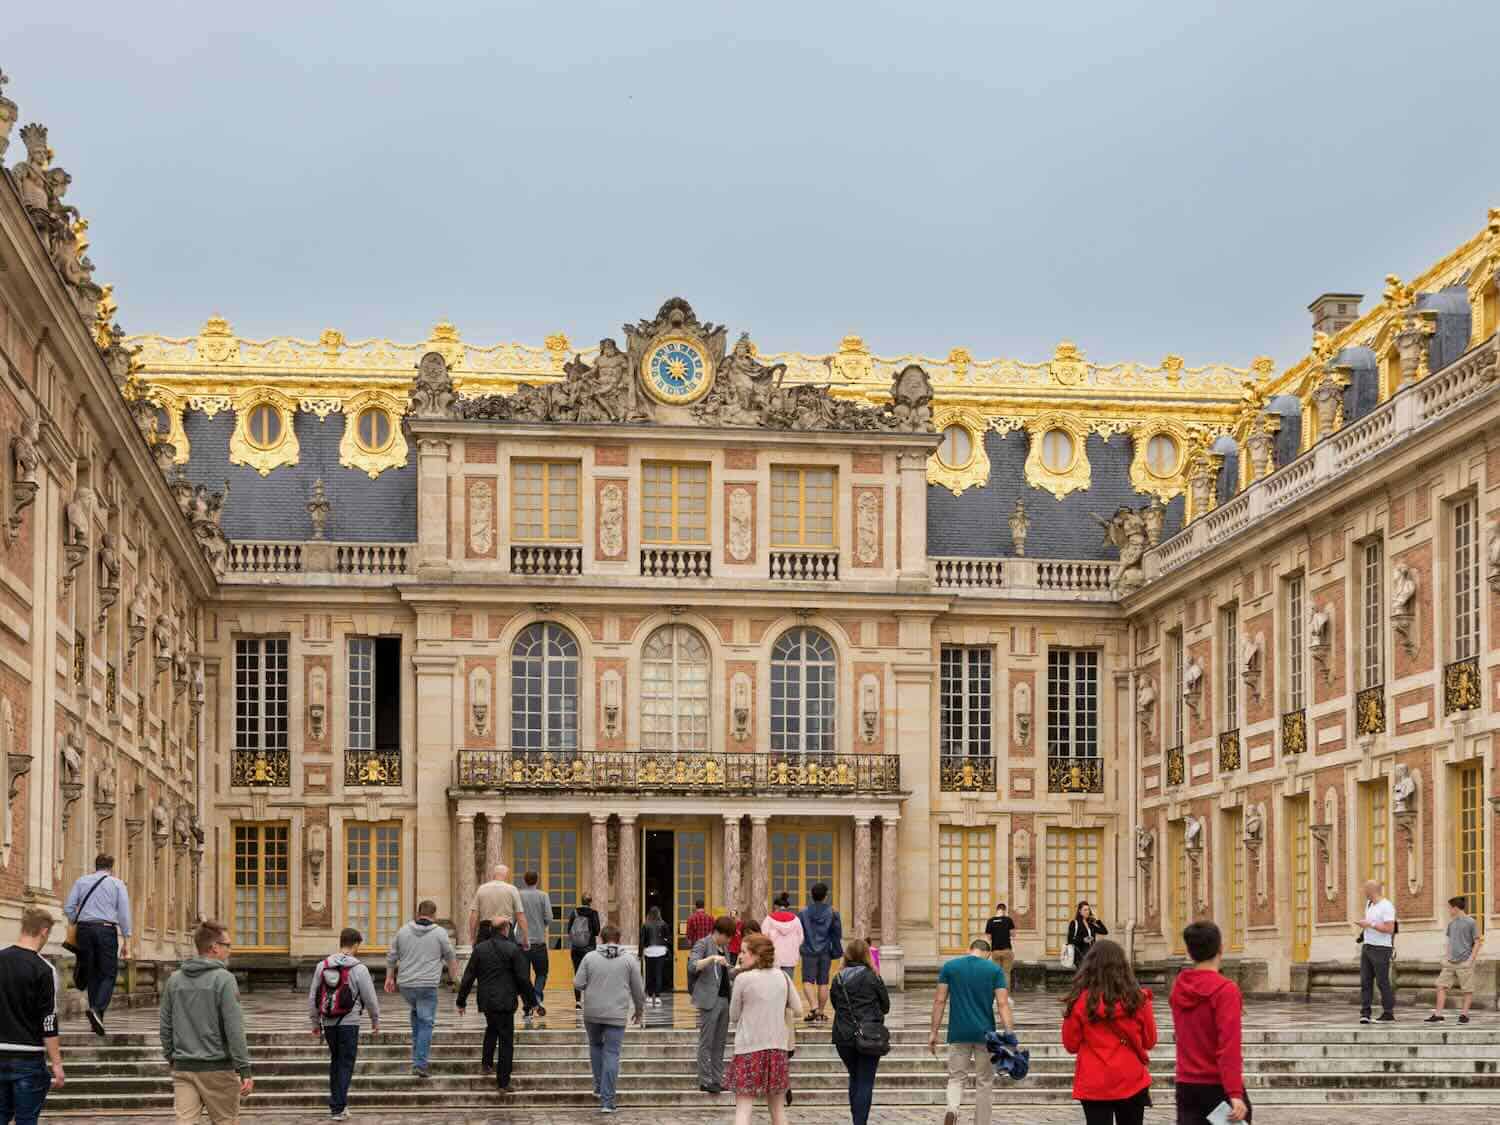 A crowd walks up steps toward the ornate Palace of Versailles with a slate roof trimmed in gold.